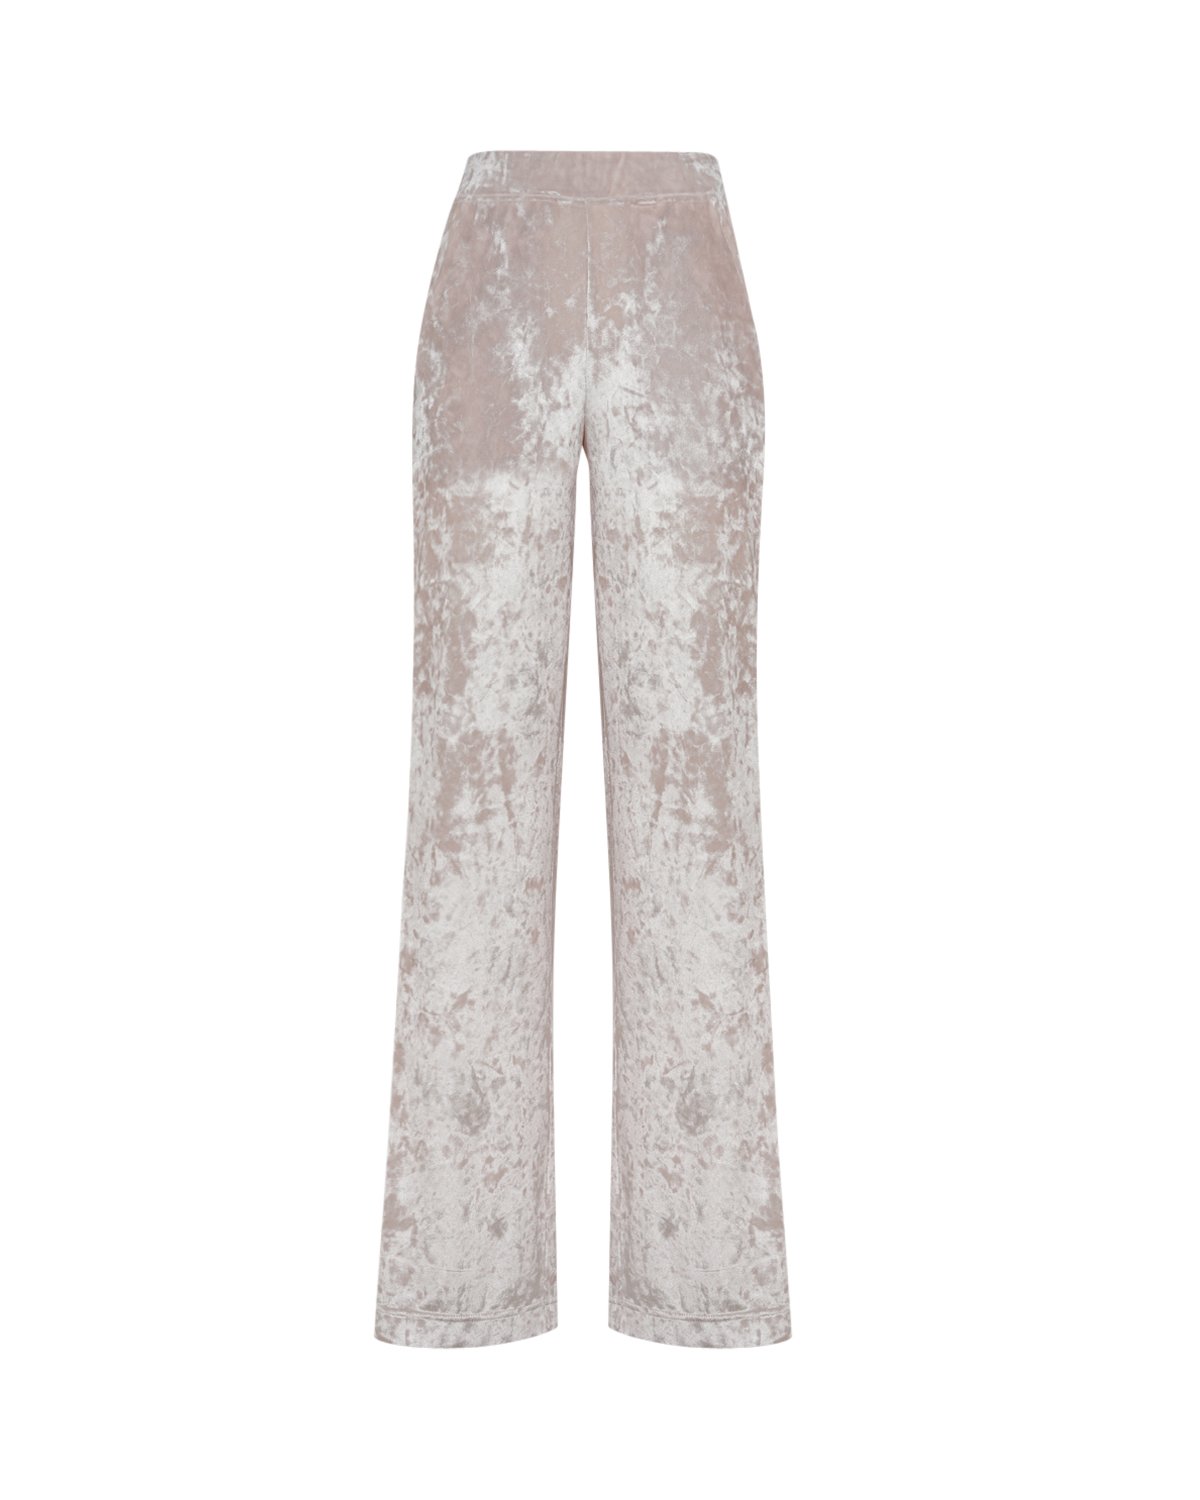 White trousers with embroidered details | This week new arrivals, Homewear & Lingerie | Genny